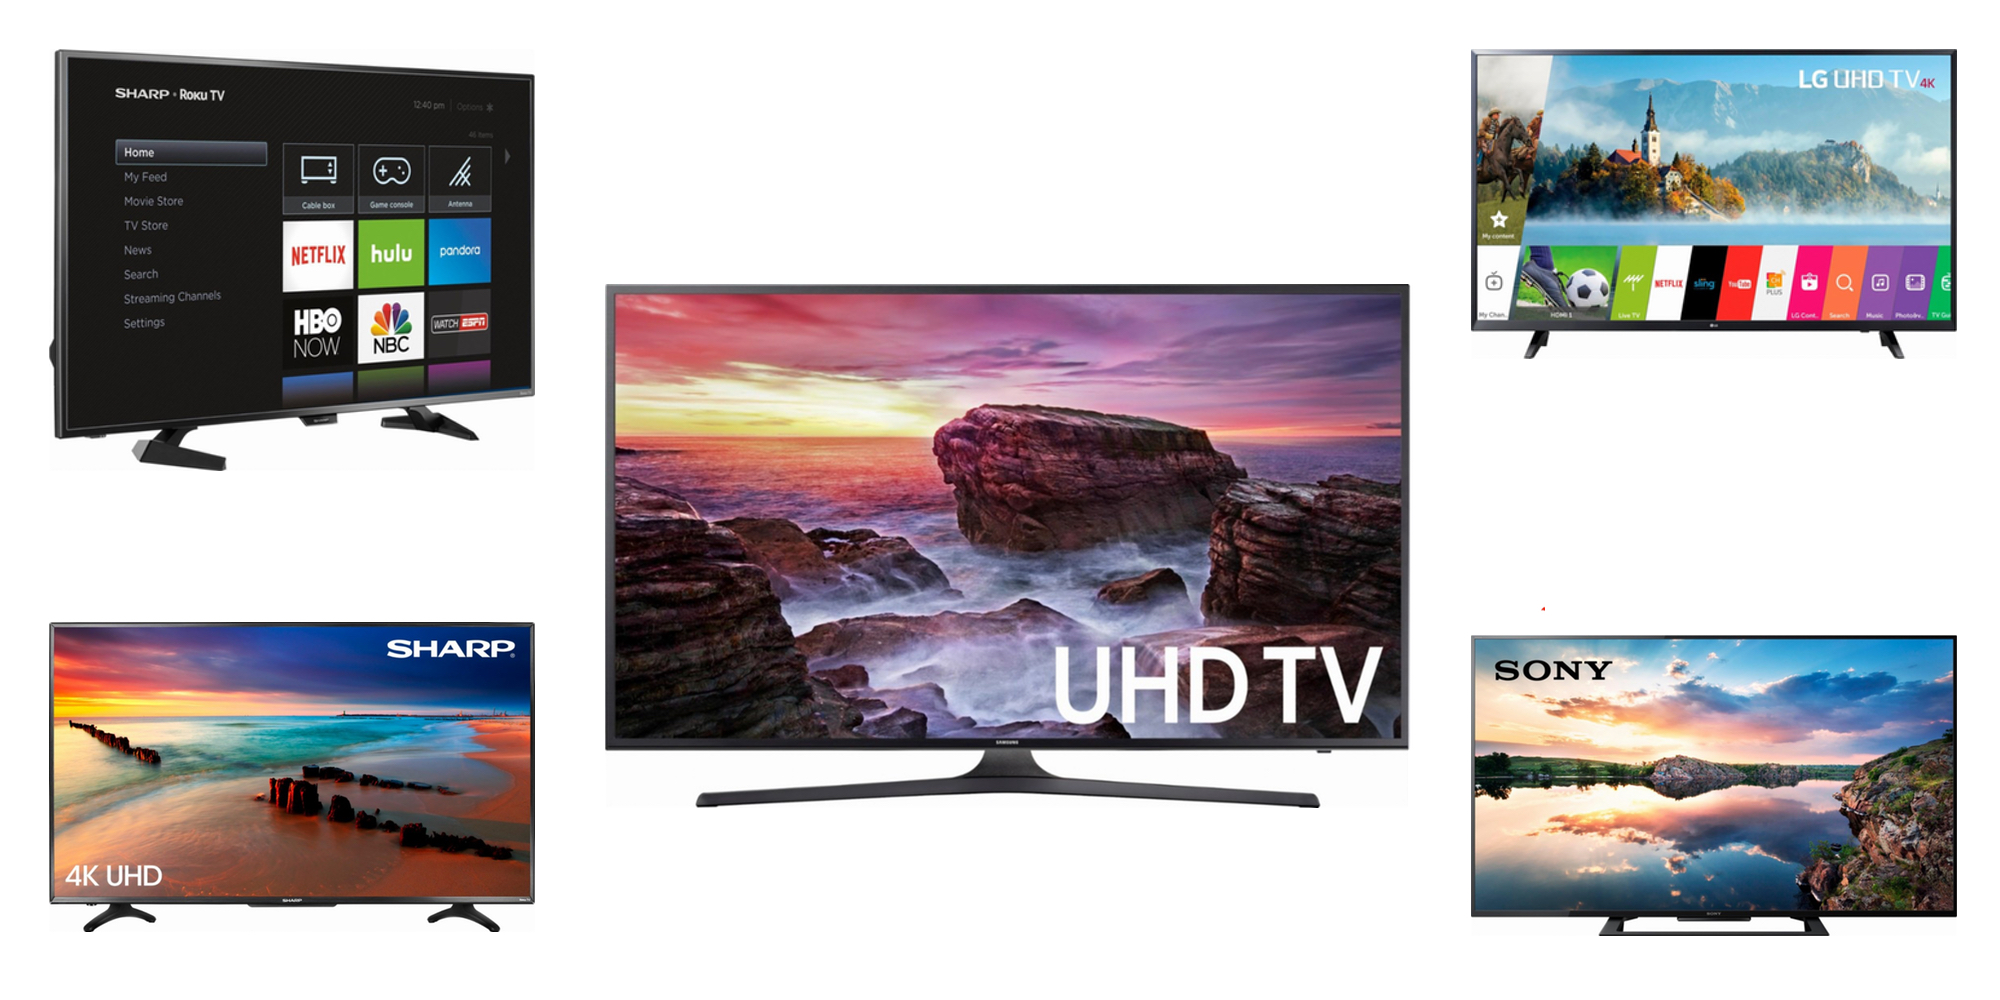 Black Friday 2017 TV deals: Samsung 55-inch $300 off, Sharp Roku 50-inch $180, more - 9to5Toys